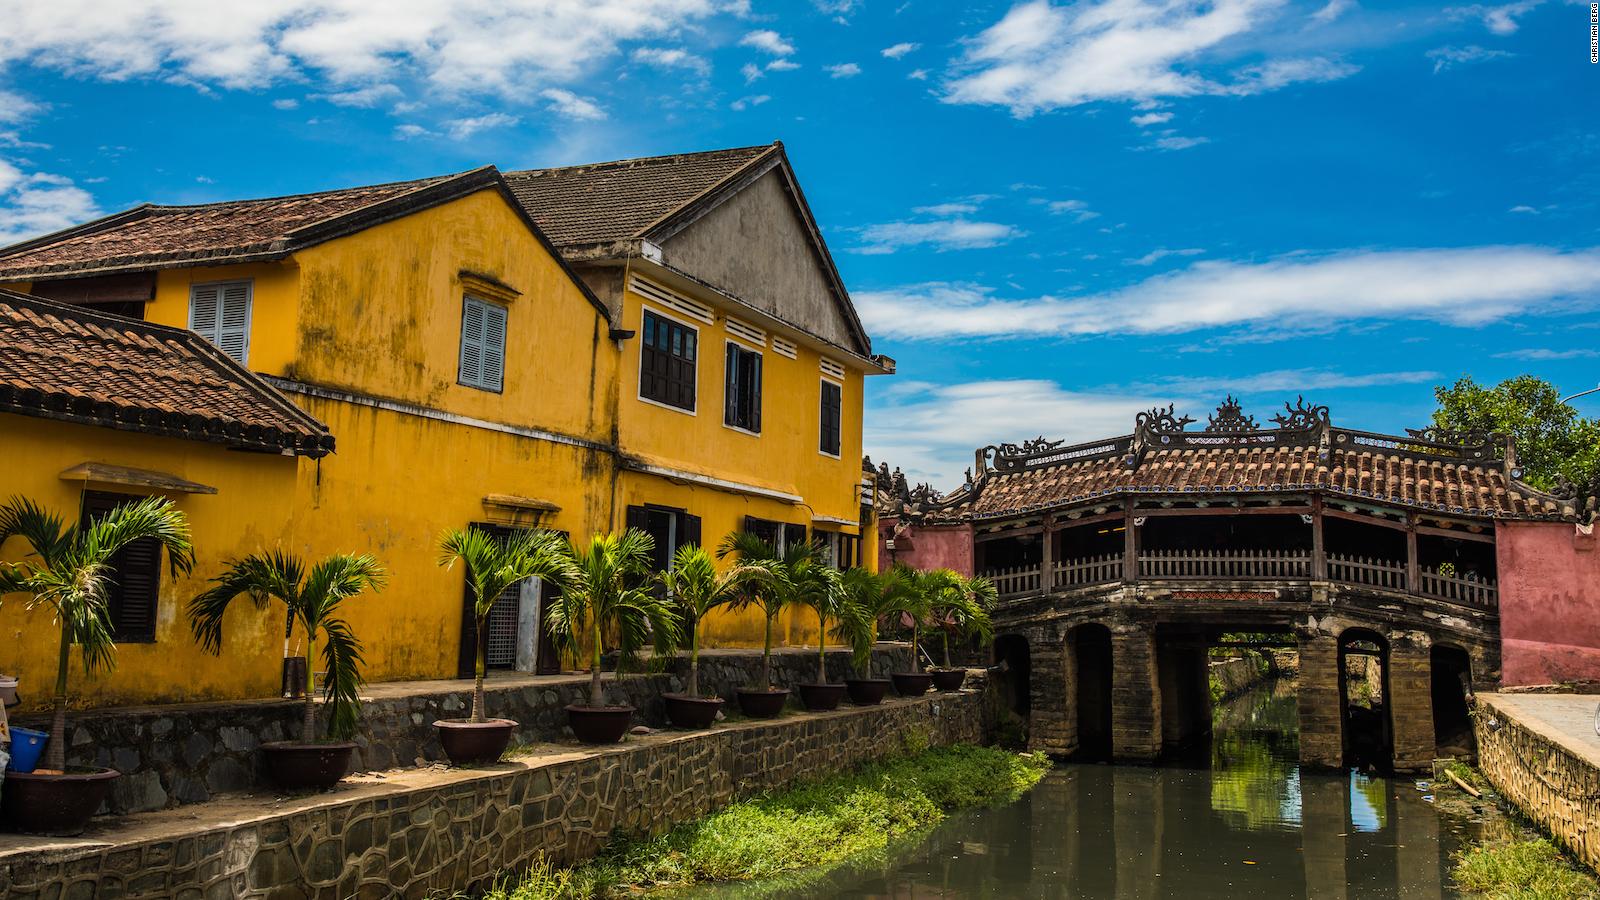 Best things to do in Hoi An, Vietnam